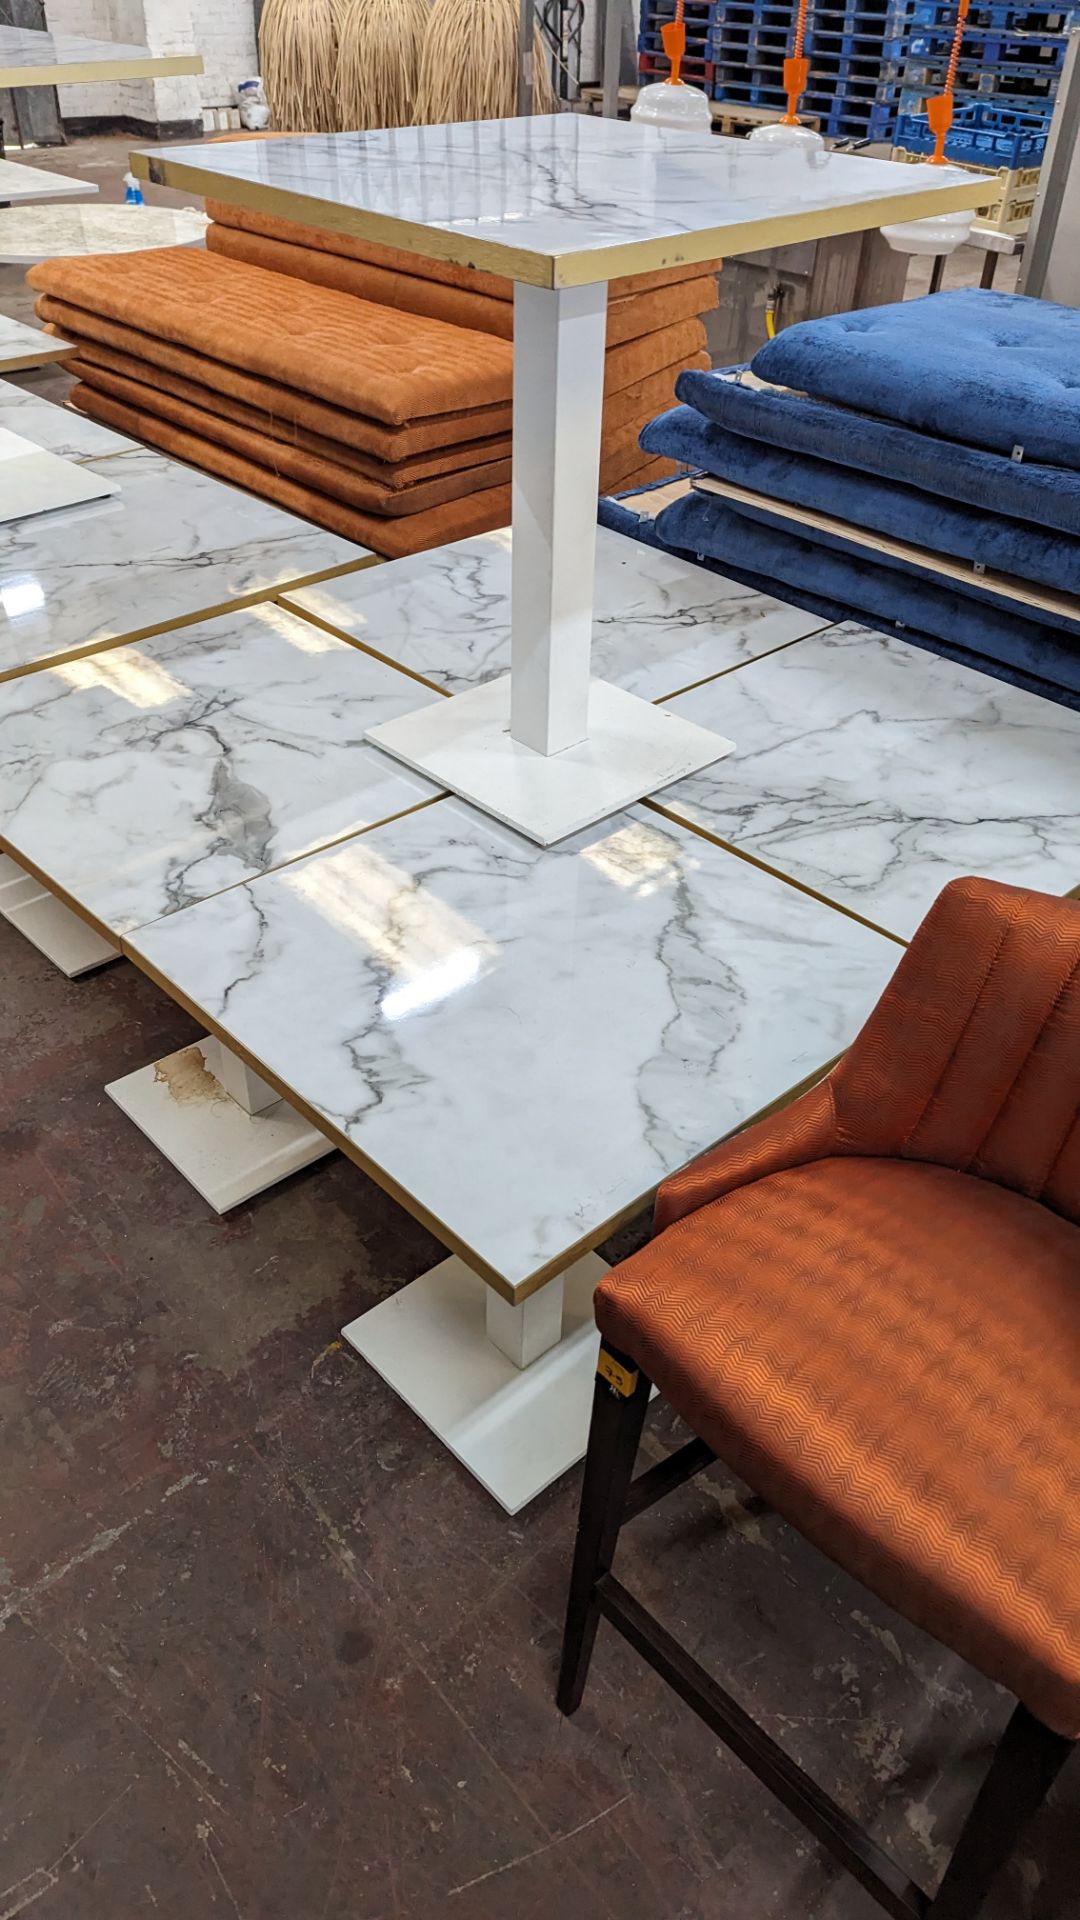 10 off matching dining tables in 3 different sizes with marble effect tops. 2 of the tables are ret - Image 19 of 19